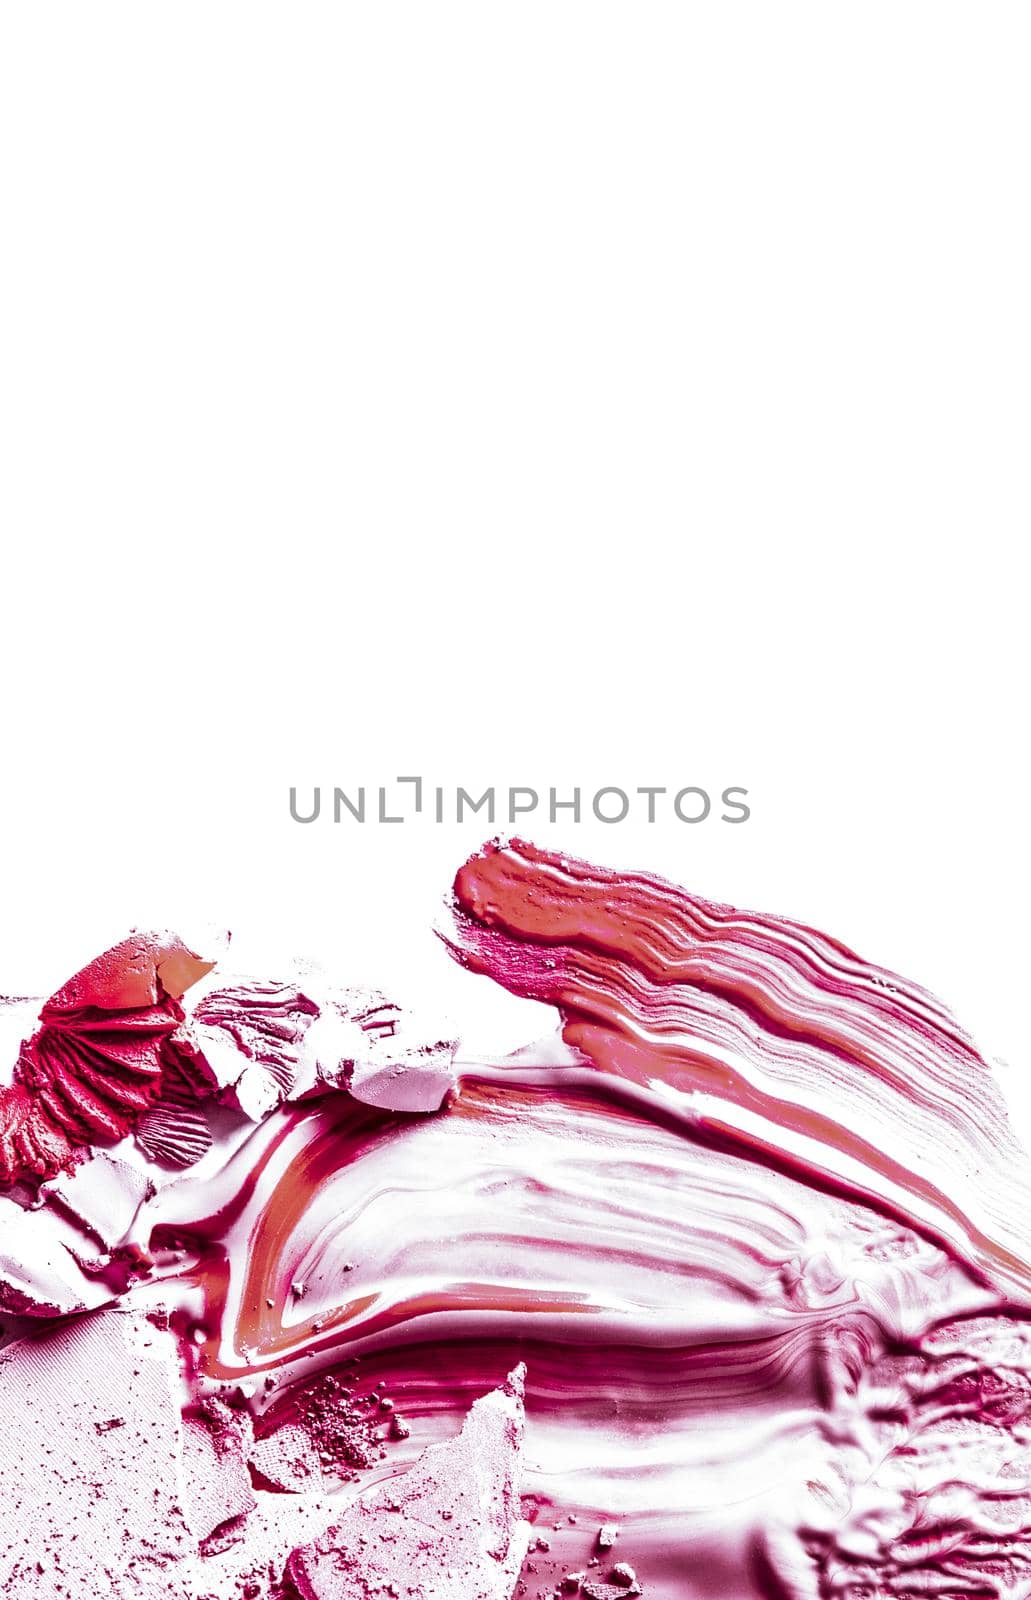 Beauty texture, cosmetic product and art of make-up concept - Crushed eyeshadow, powder and liquid foundation close-up isolated on white background